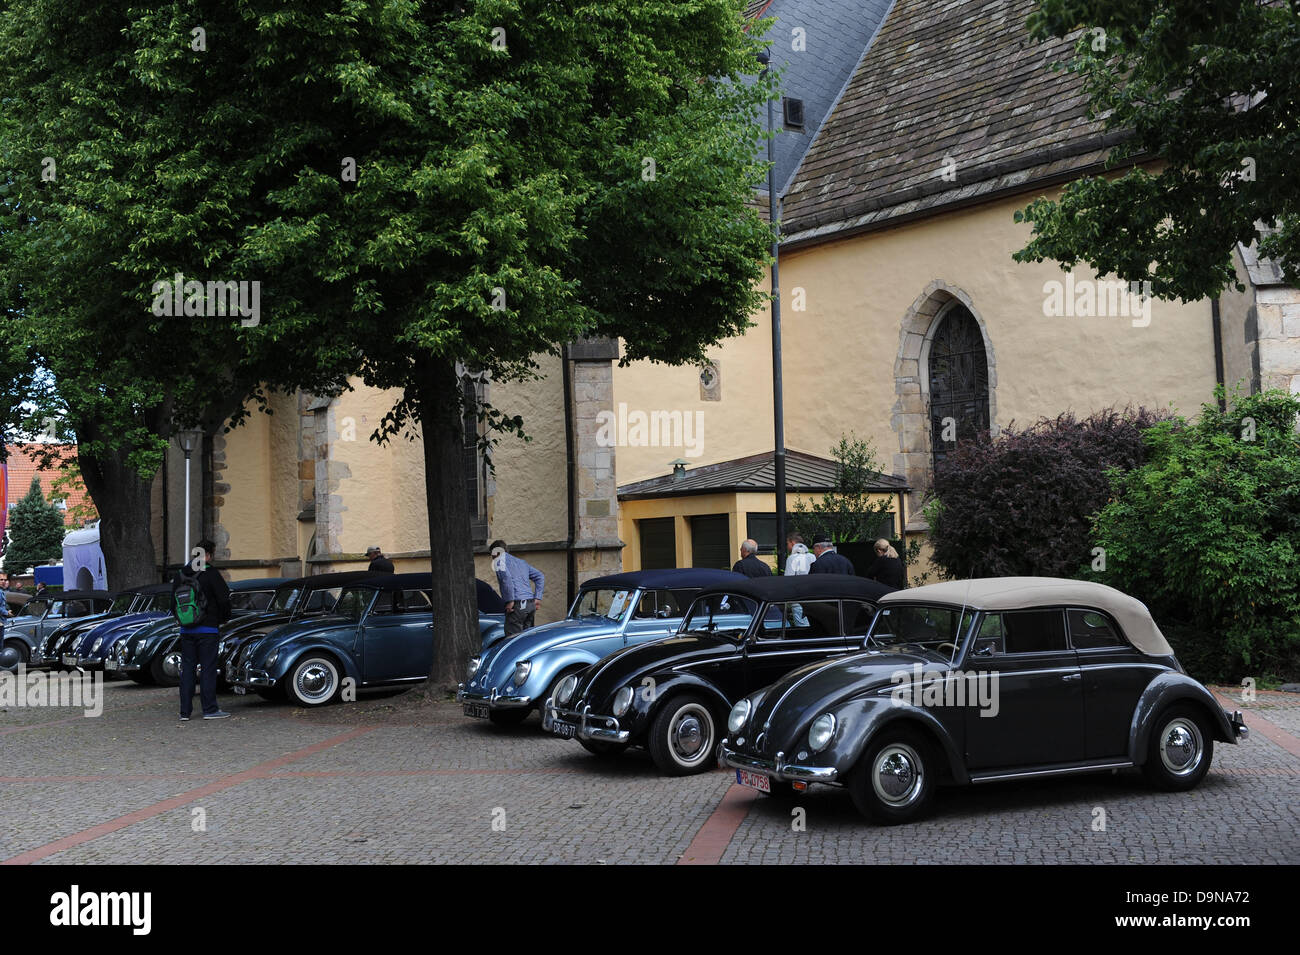 Hessisch Oldendorf, Germany. 23rd June, 2013. Volkswagen Beetle convertables are parked in the old town of Hessisch Oldendorf, Germany, 23 June 2013. Every four years, the Volkswagen Beetle Convention is held in Hessisch Oldendorf. Photo: PETER STEFFEN/dpa/Alamy Live News Stock Photo